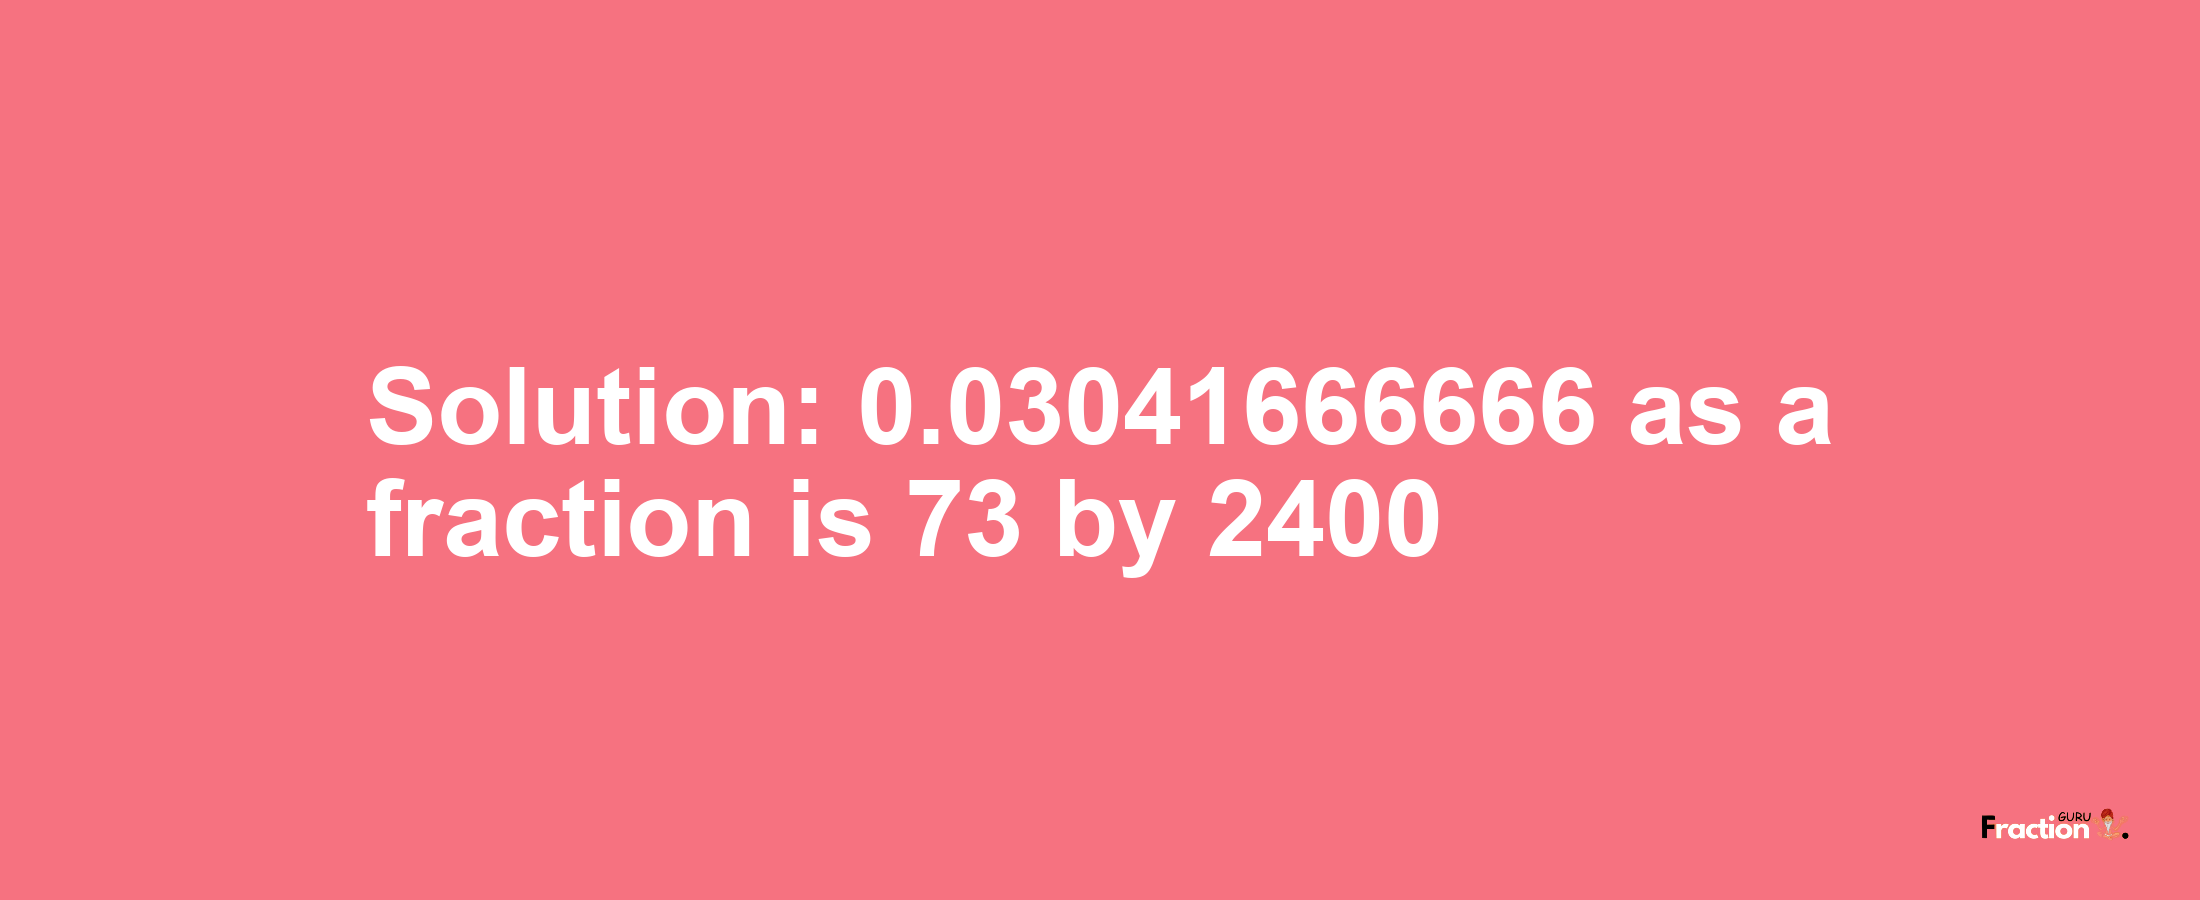 Solution:0.03041666666 as a fraction is 73/2400